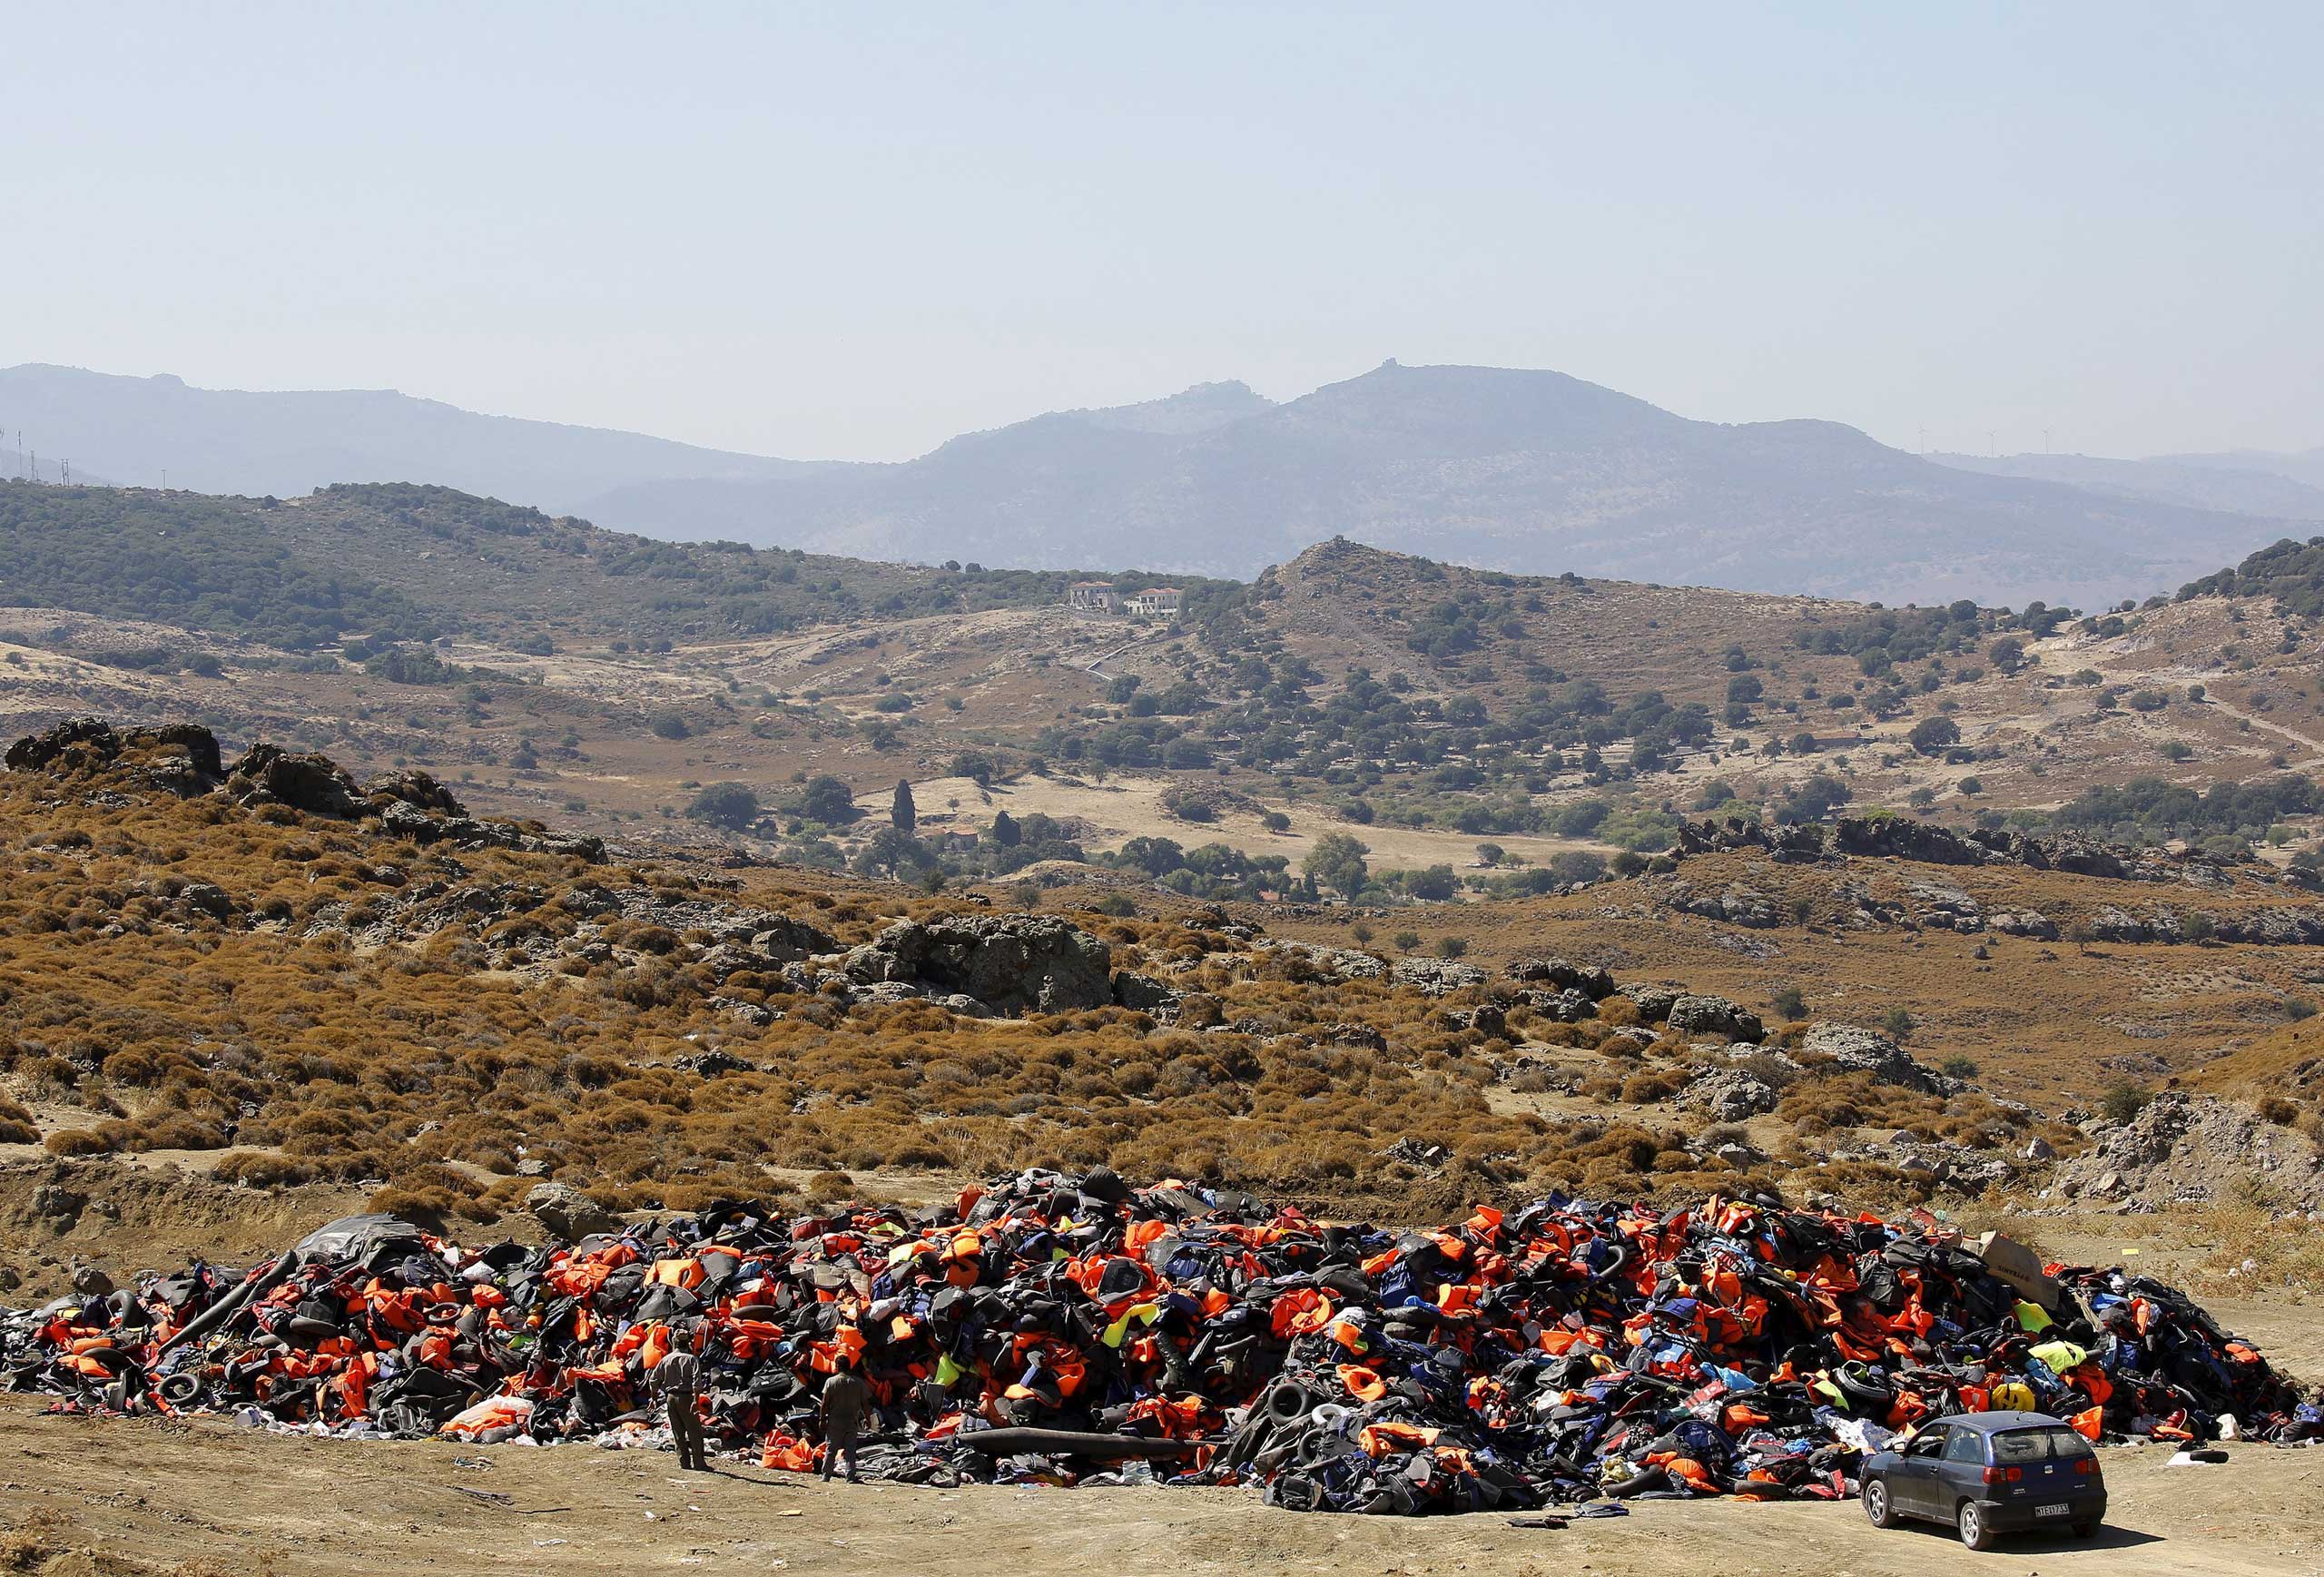 Mountain lifevests dinghies Lesbos migrants